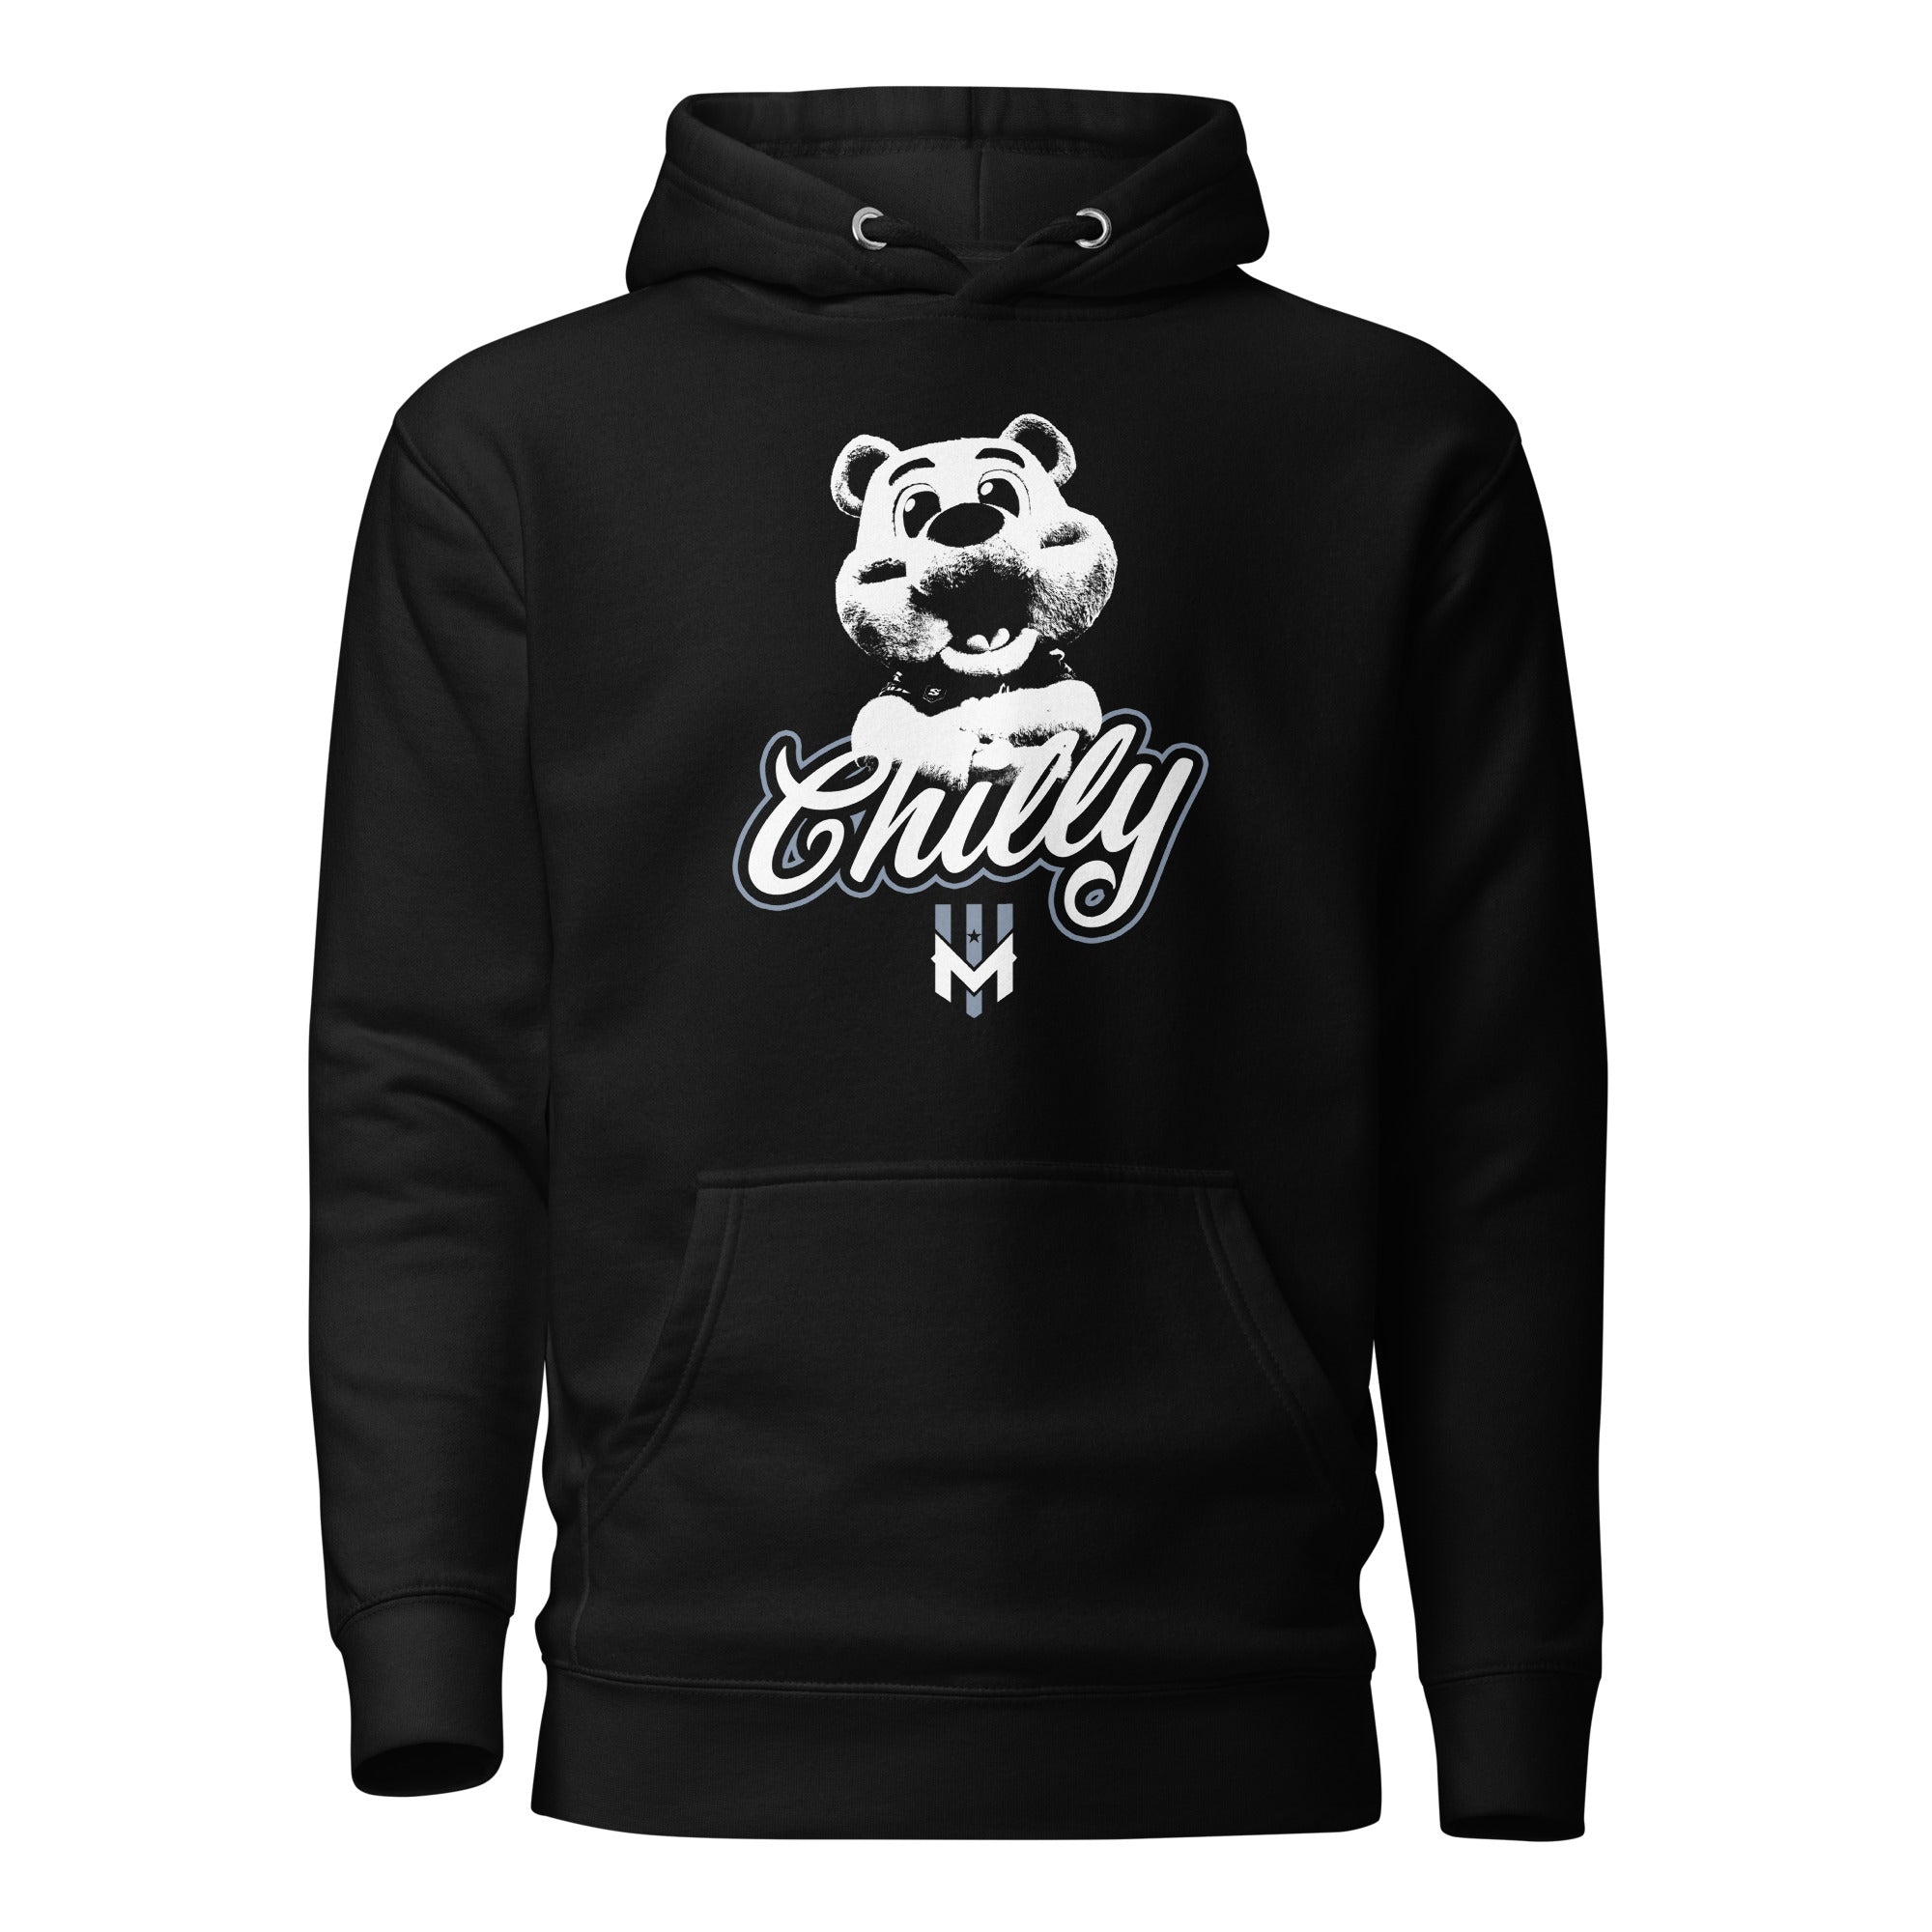 Wind Chill Black "Chilly the Mascot" Hooded Sweatshirt hi